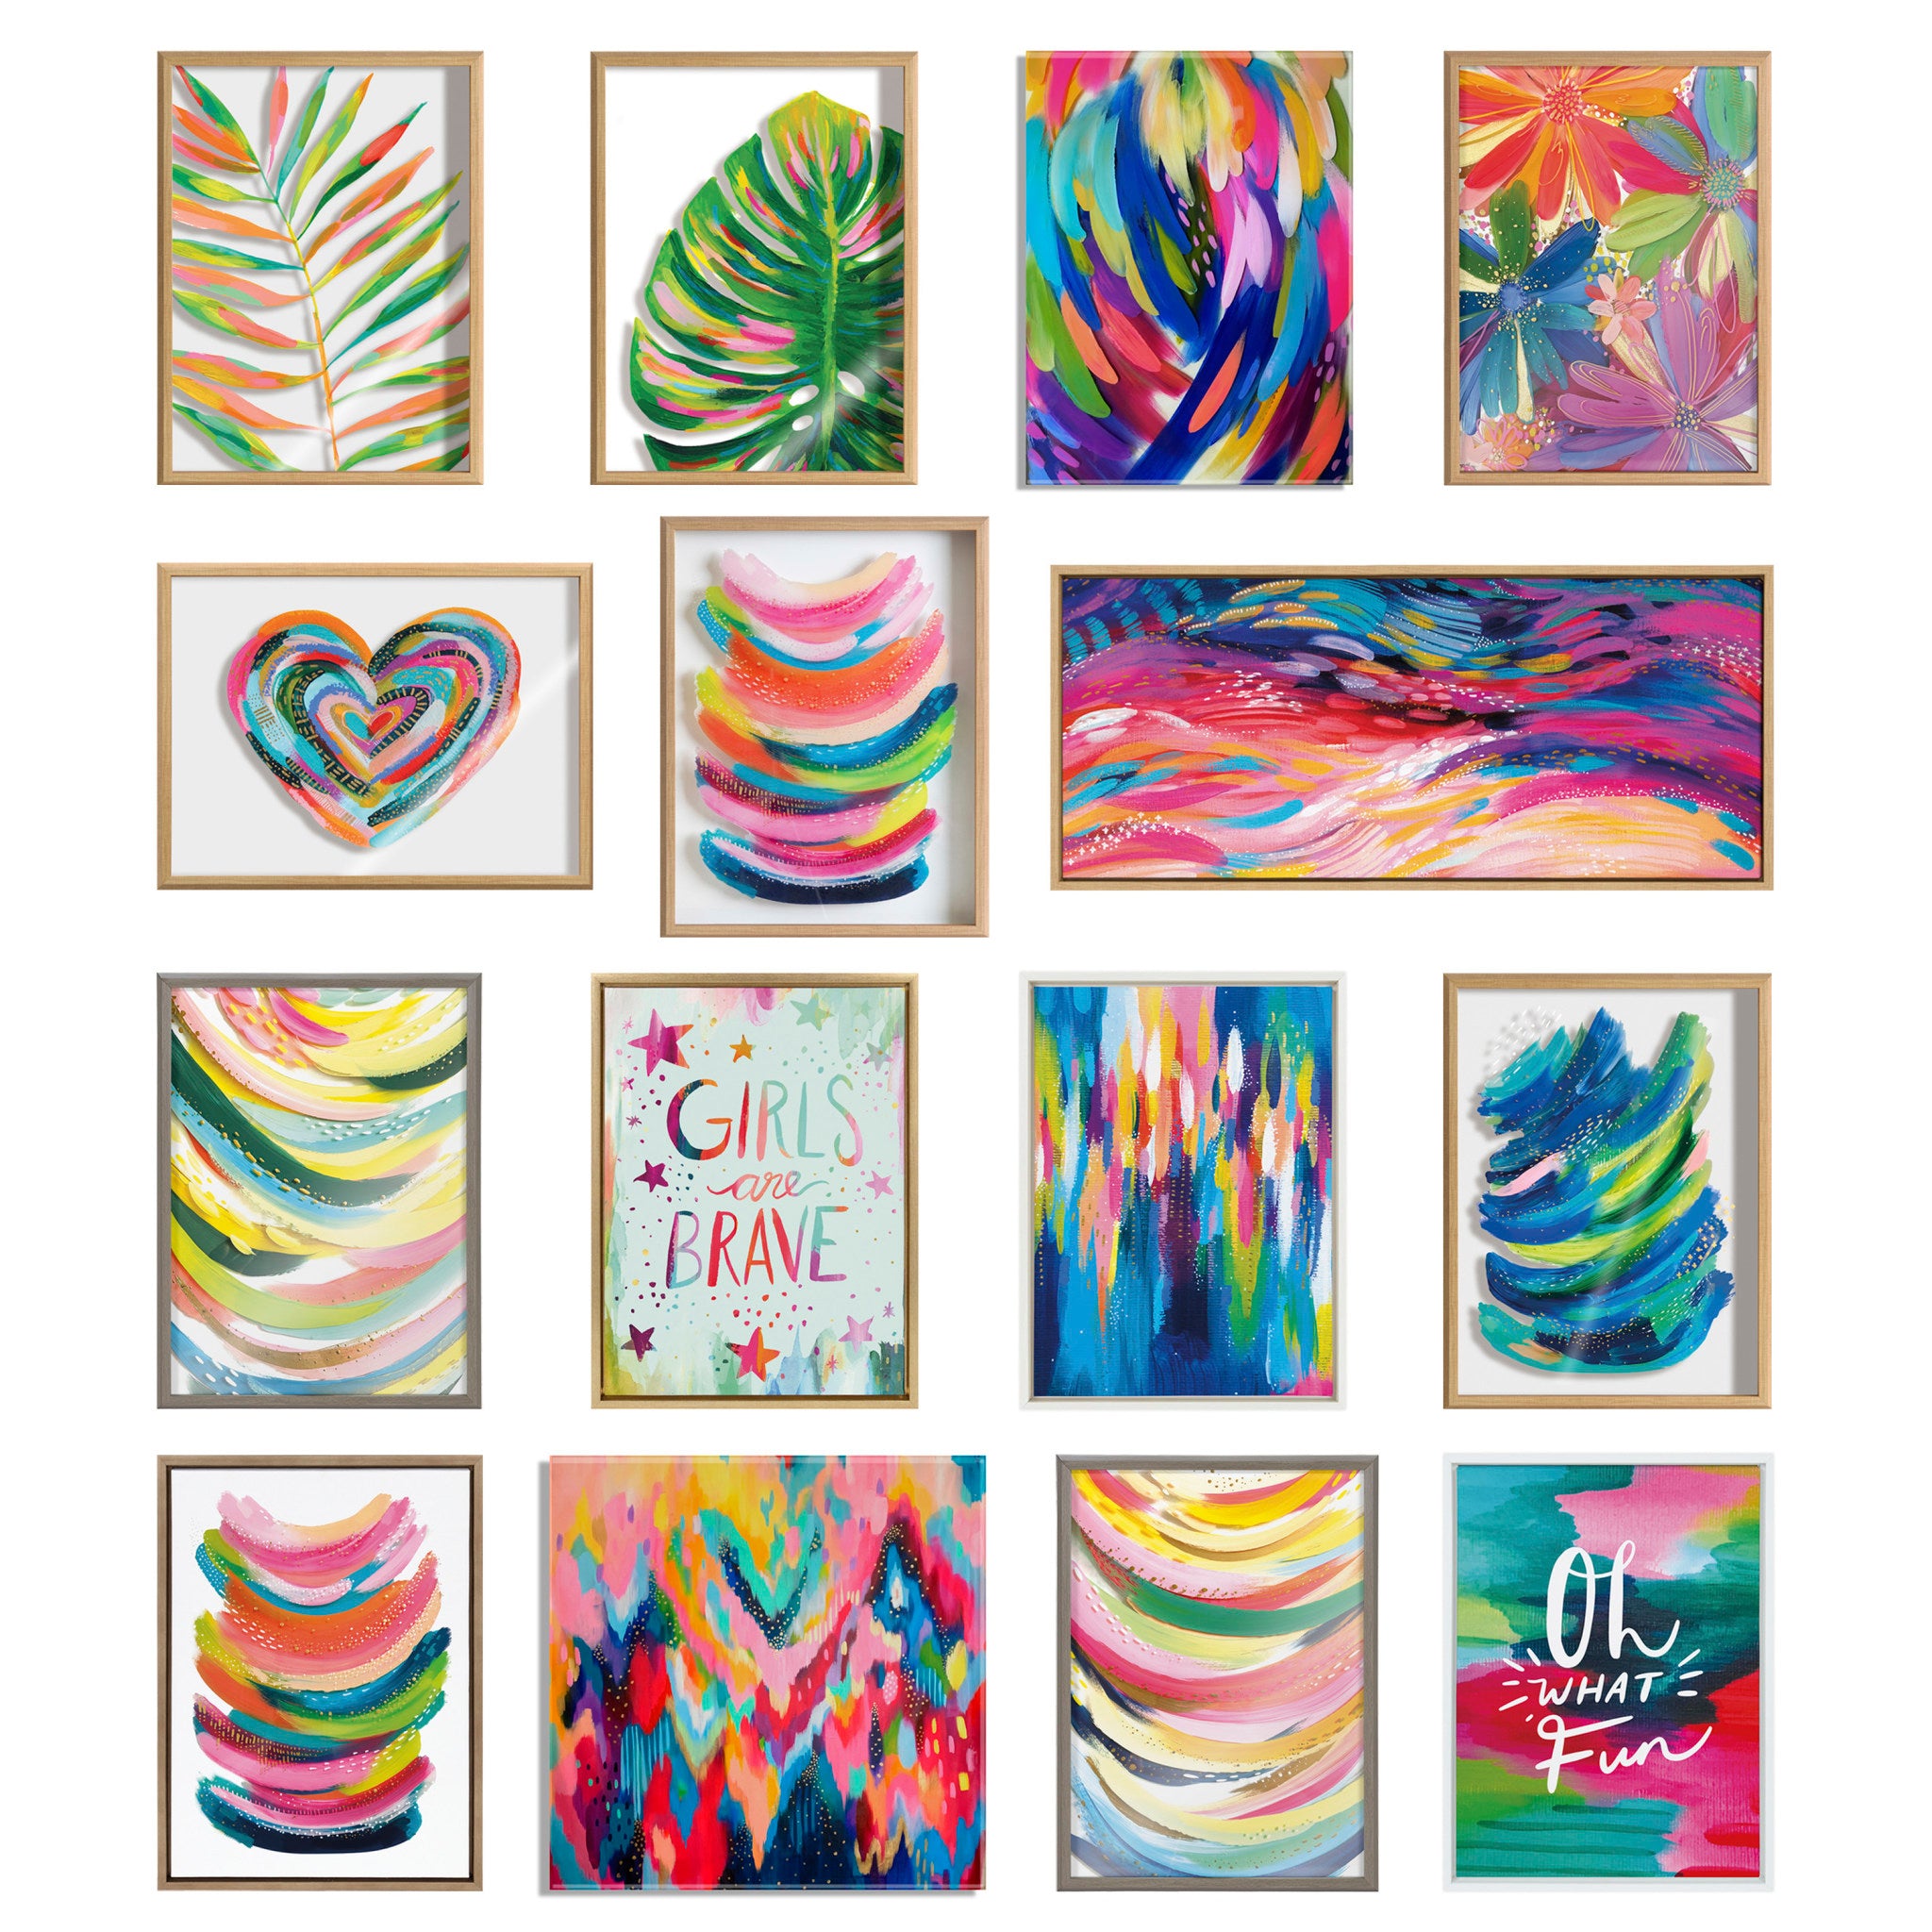 Sylvie Brushstroke and Bright Abstract Framed Canvas Set by Jessi Raulet of Ettavee